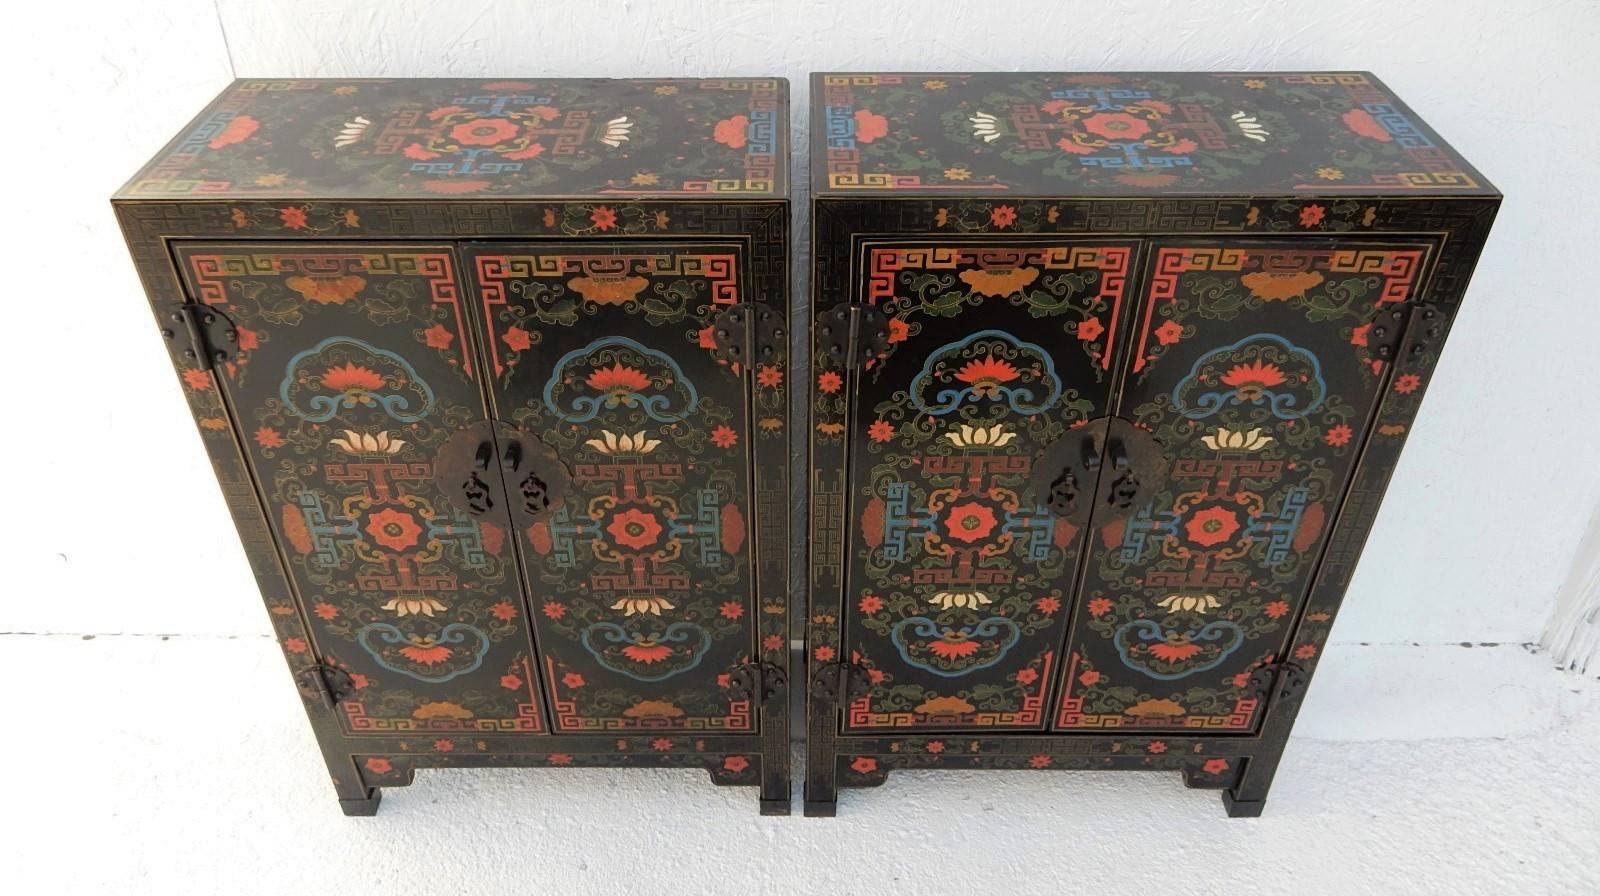 Gorgeous pair of Asian wedding cabinets each hand-painted in beautiful colors over black lacquer.
They are exceptional presentation pieces.
The optical design is organic with lotus flowers, flowers and vines painted on front, sides and